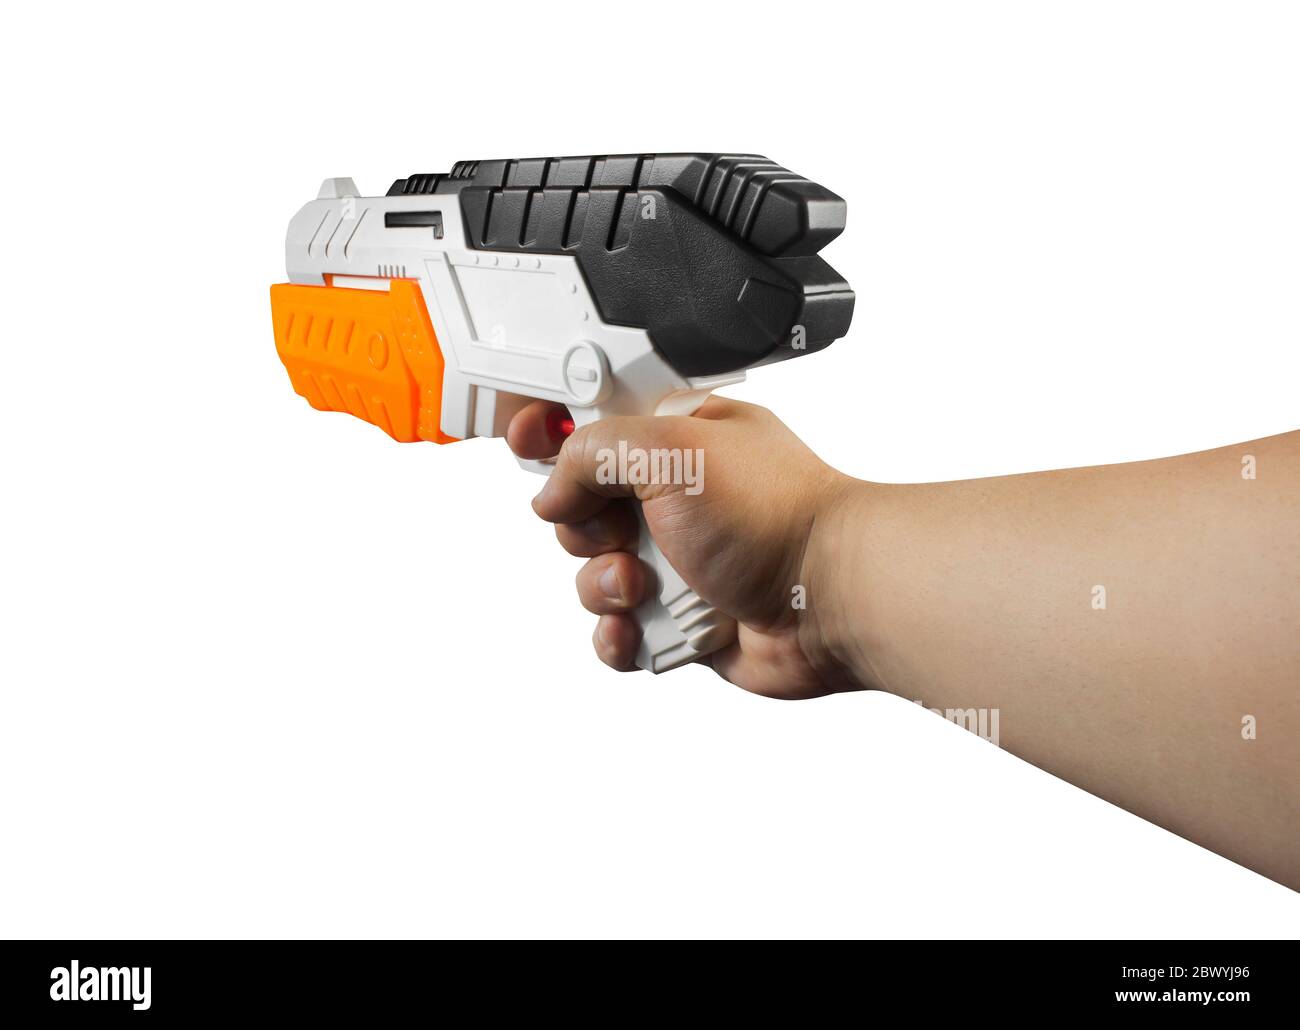 Isolated photo of hand holding a plastic water pistol on white background first person view. Stock Photo